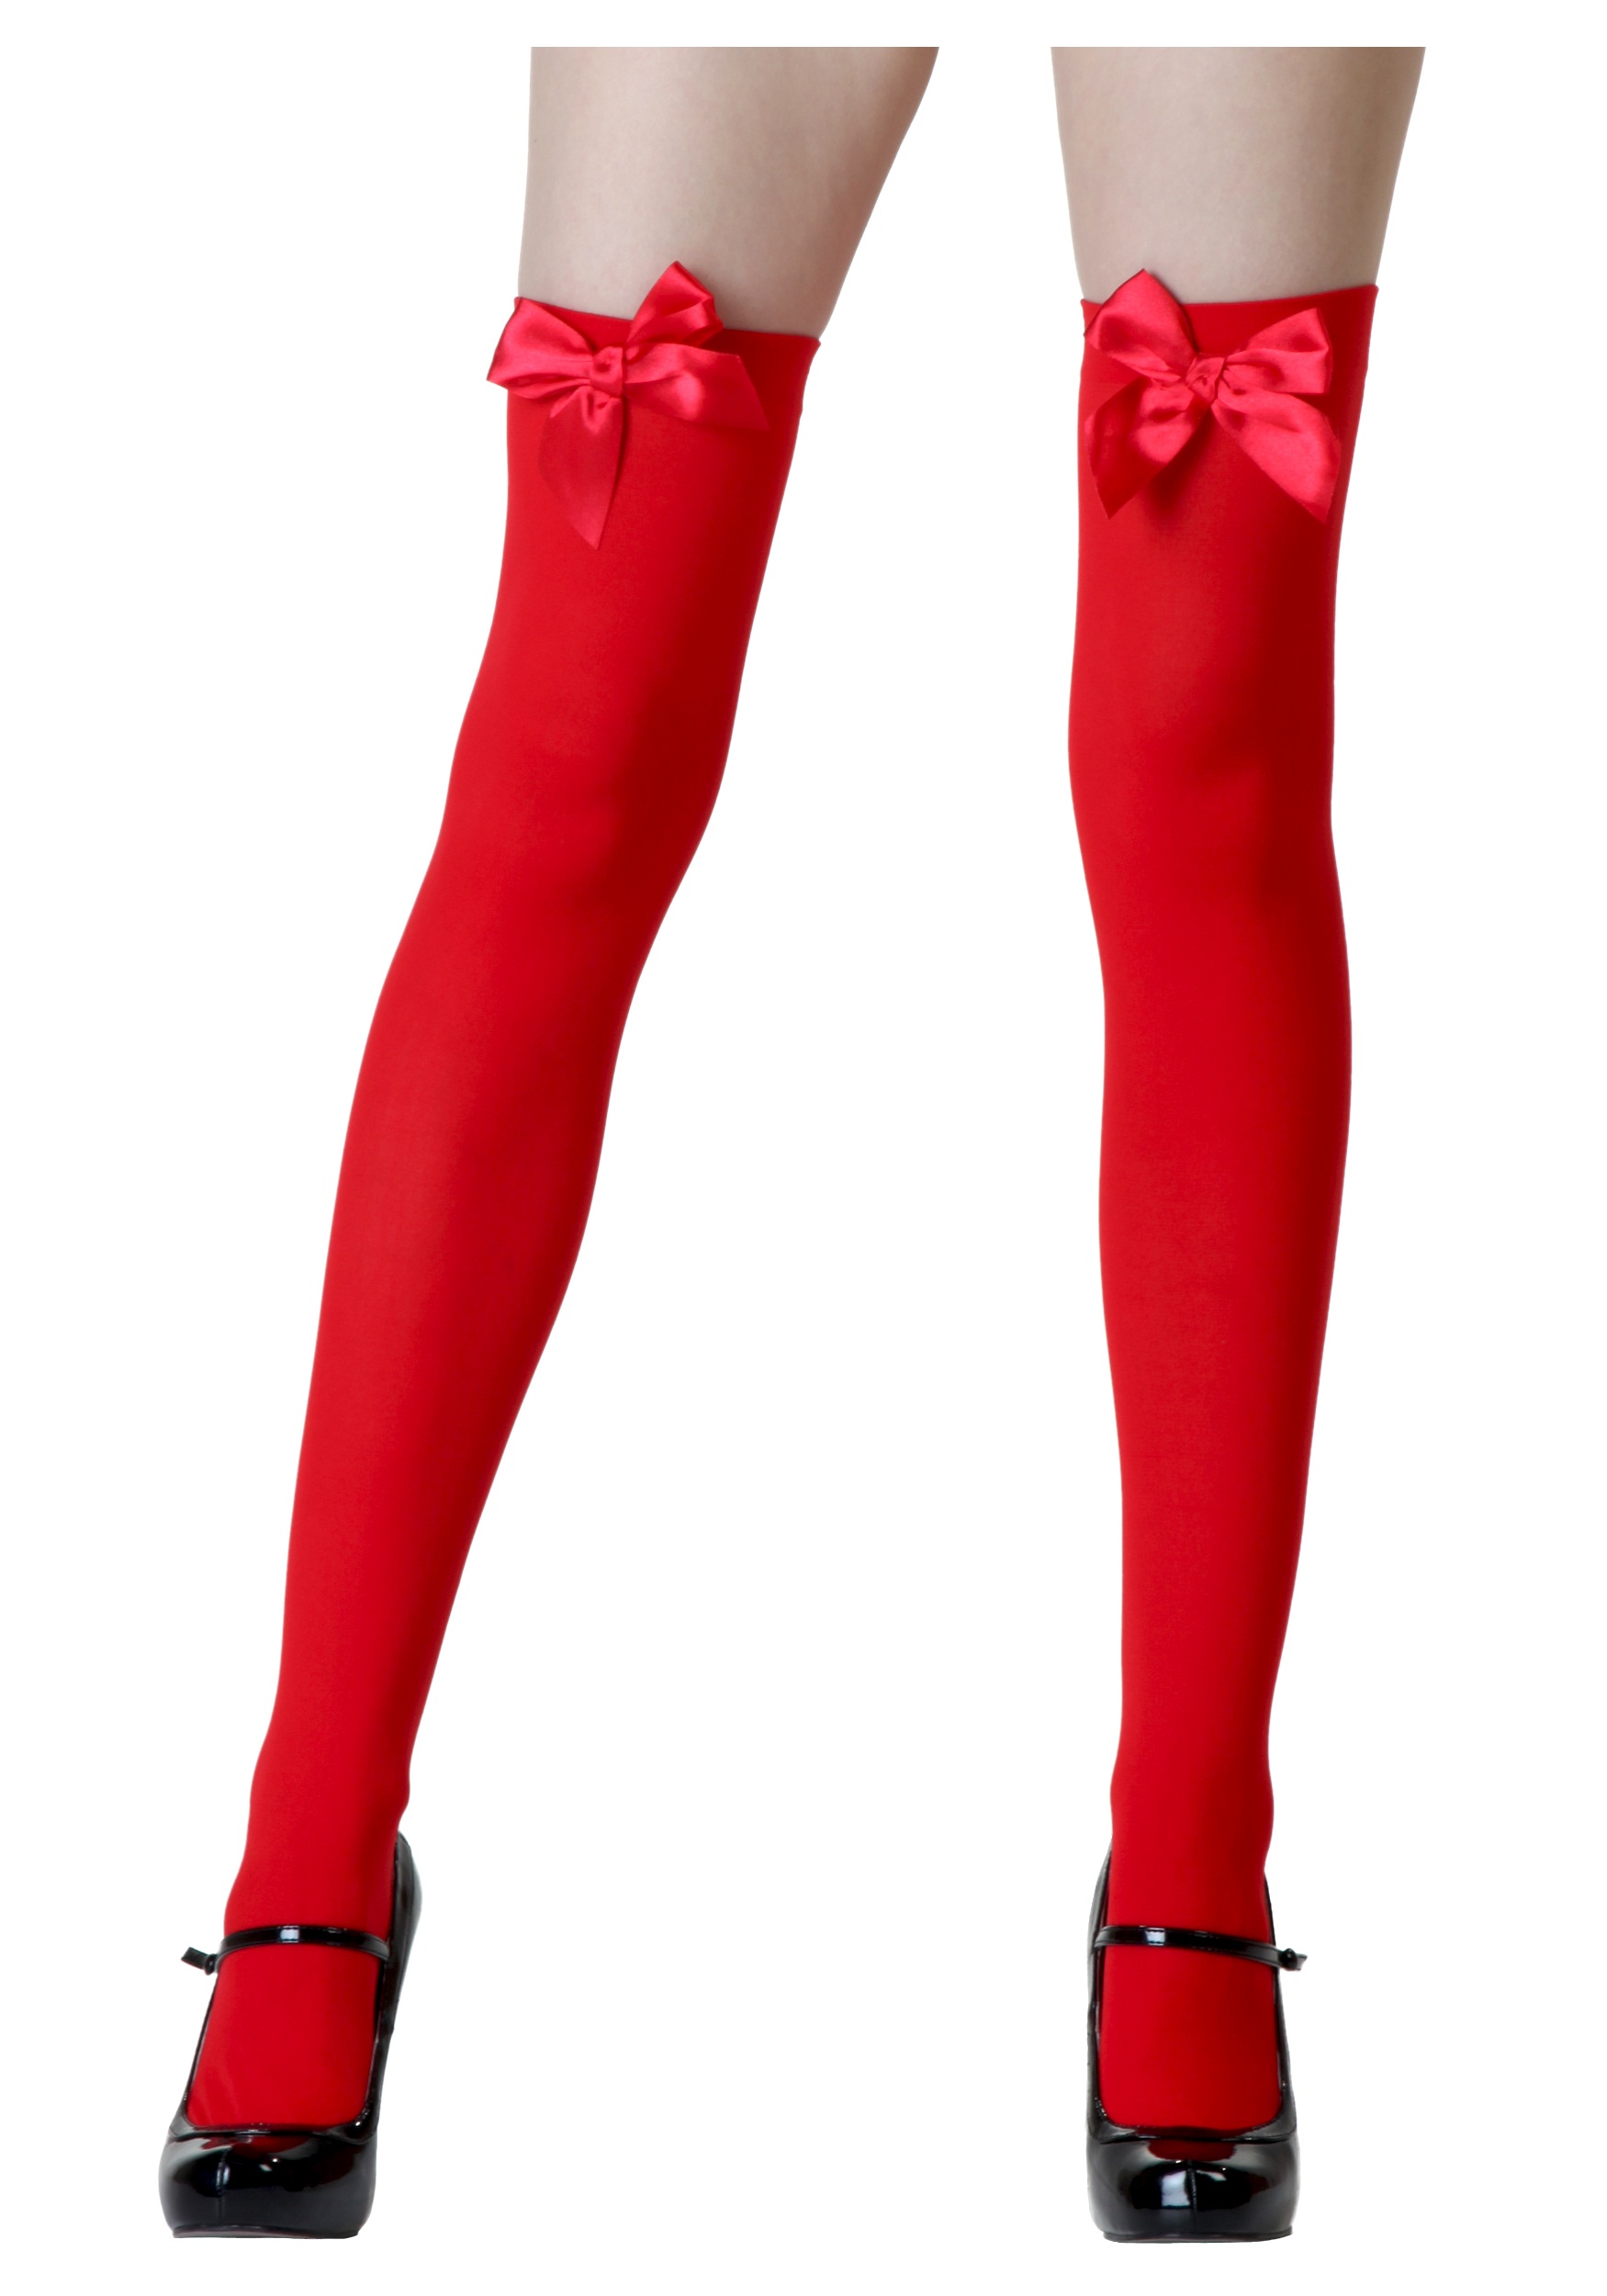 Leg Avenue Women's Opaque Thigh High Stockings with Satin Bow, Red, One Size